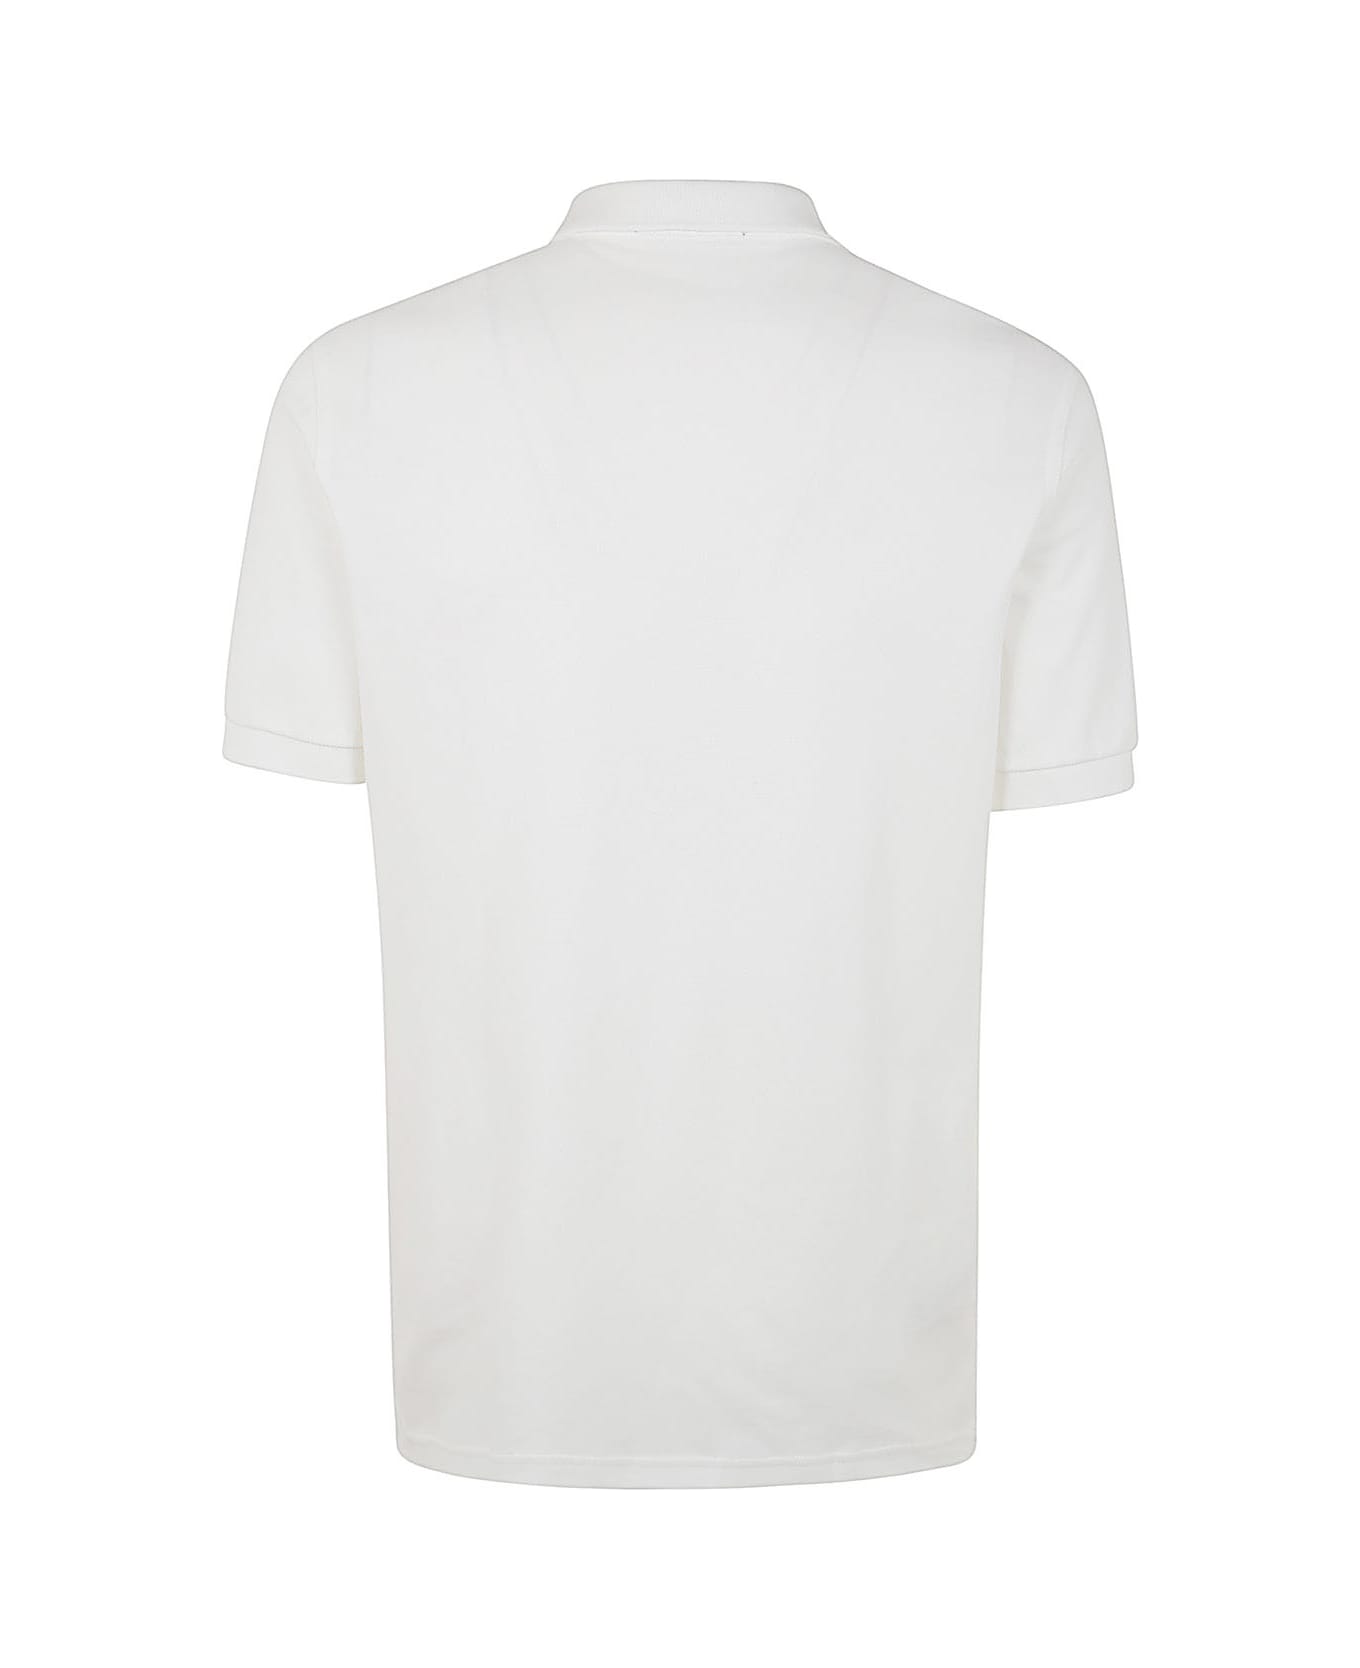 Fred Perry Fp Plain Shirt - White